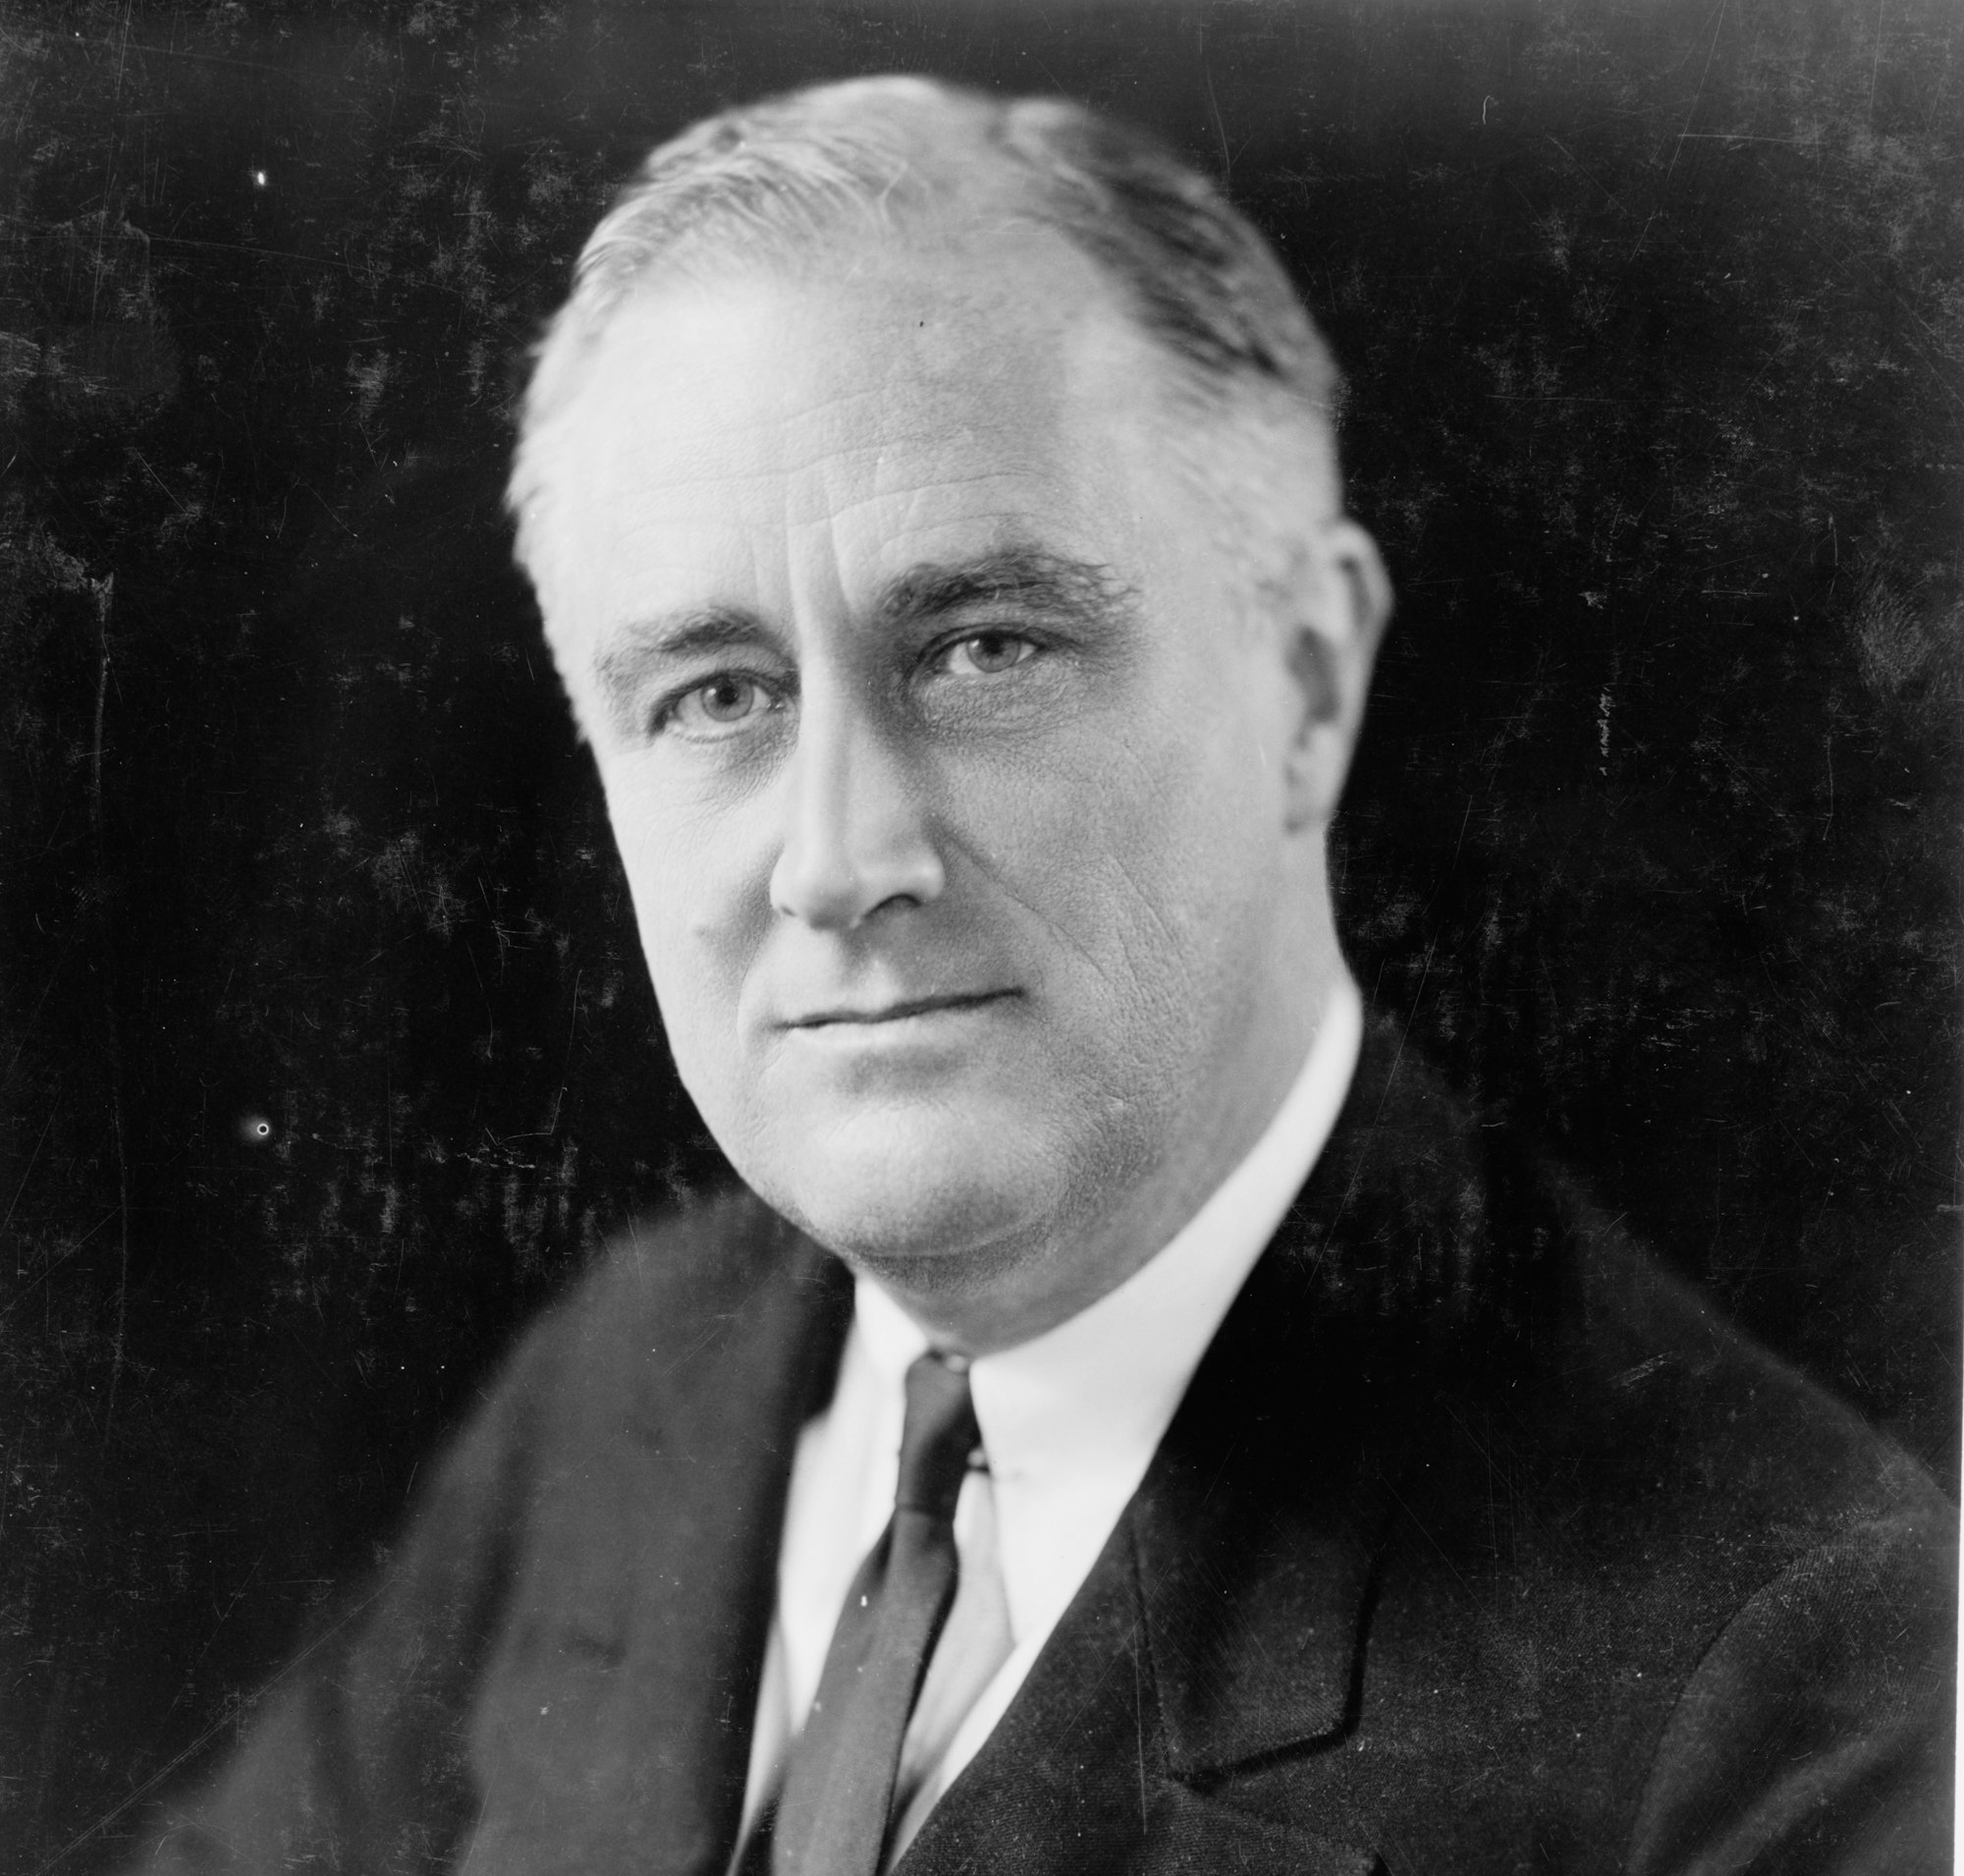 [Franklin Delano Roosevelt, head-and-shoulders portrait, facing slightly left]. Photograph by photographer Elias Goldensky, c1933. From the Presidential File Collection. Library of Congress Prints & Photographs Division.

https://www.loc.gov/item/96523441/